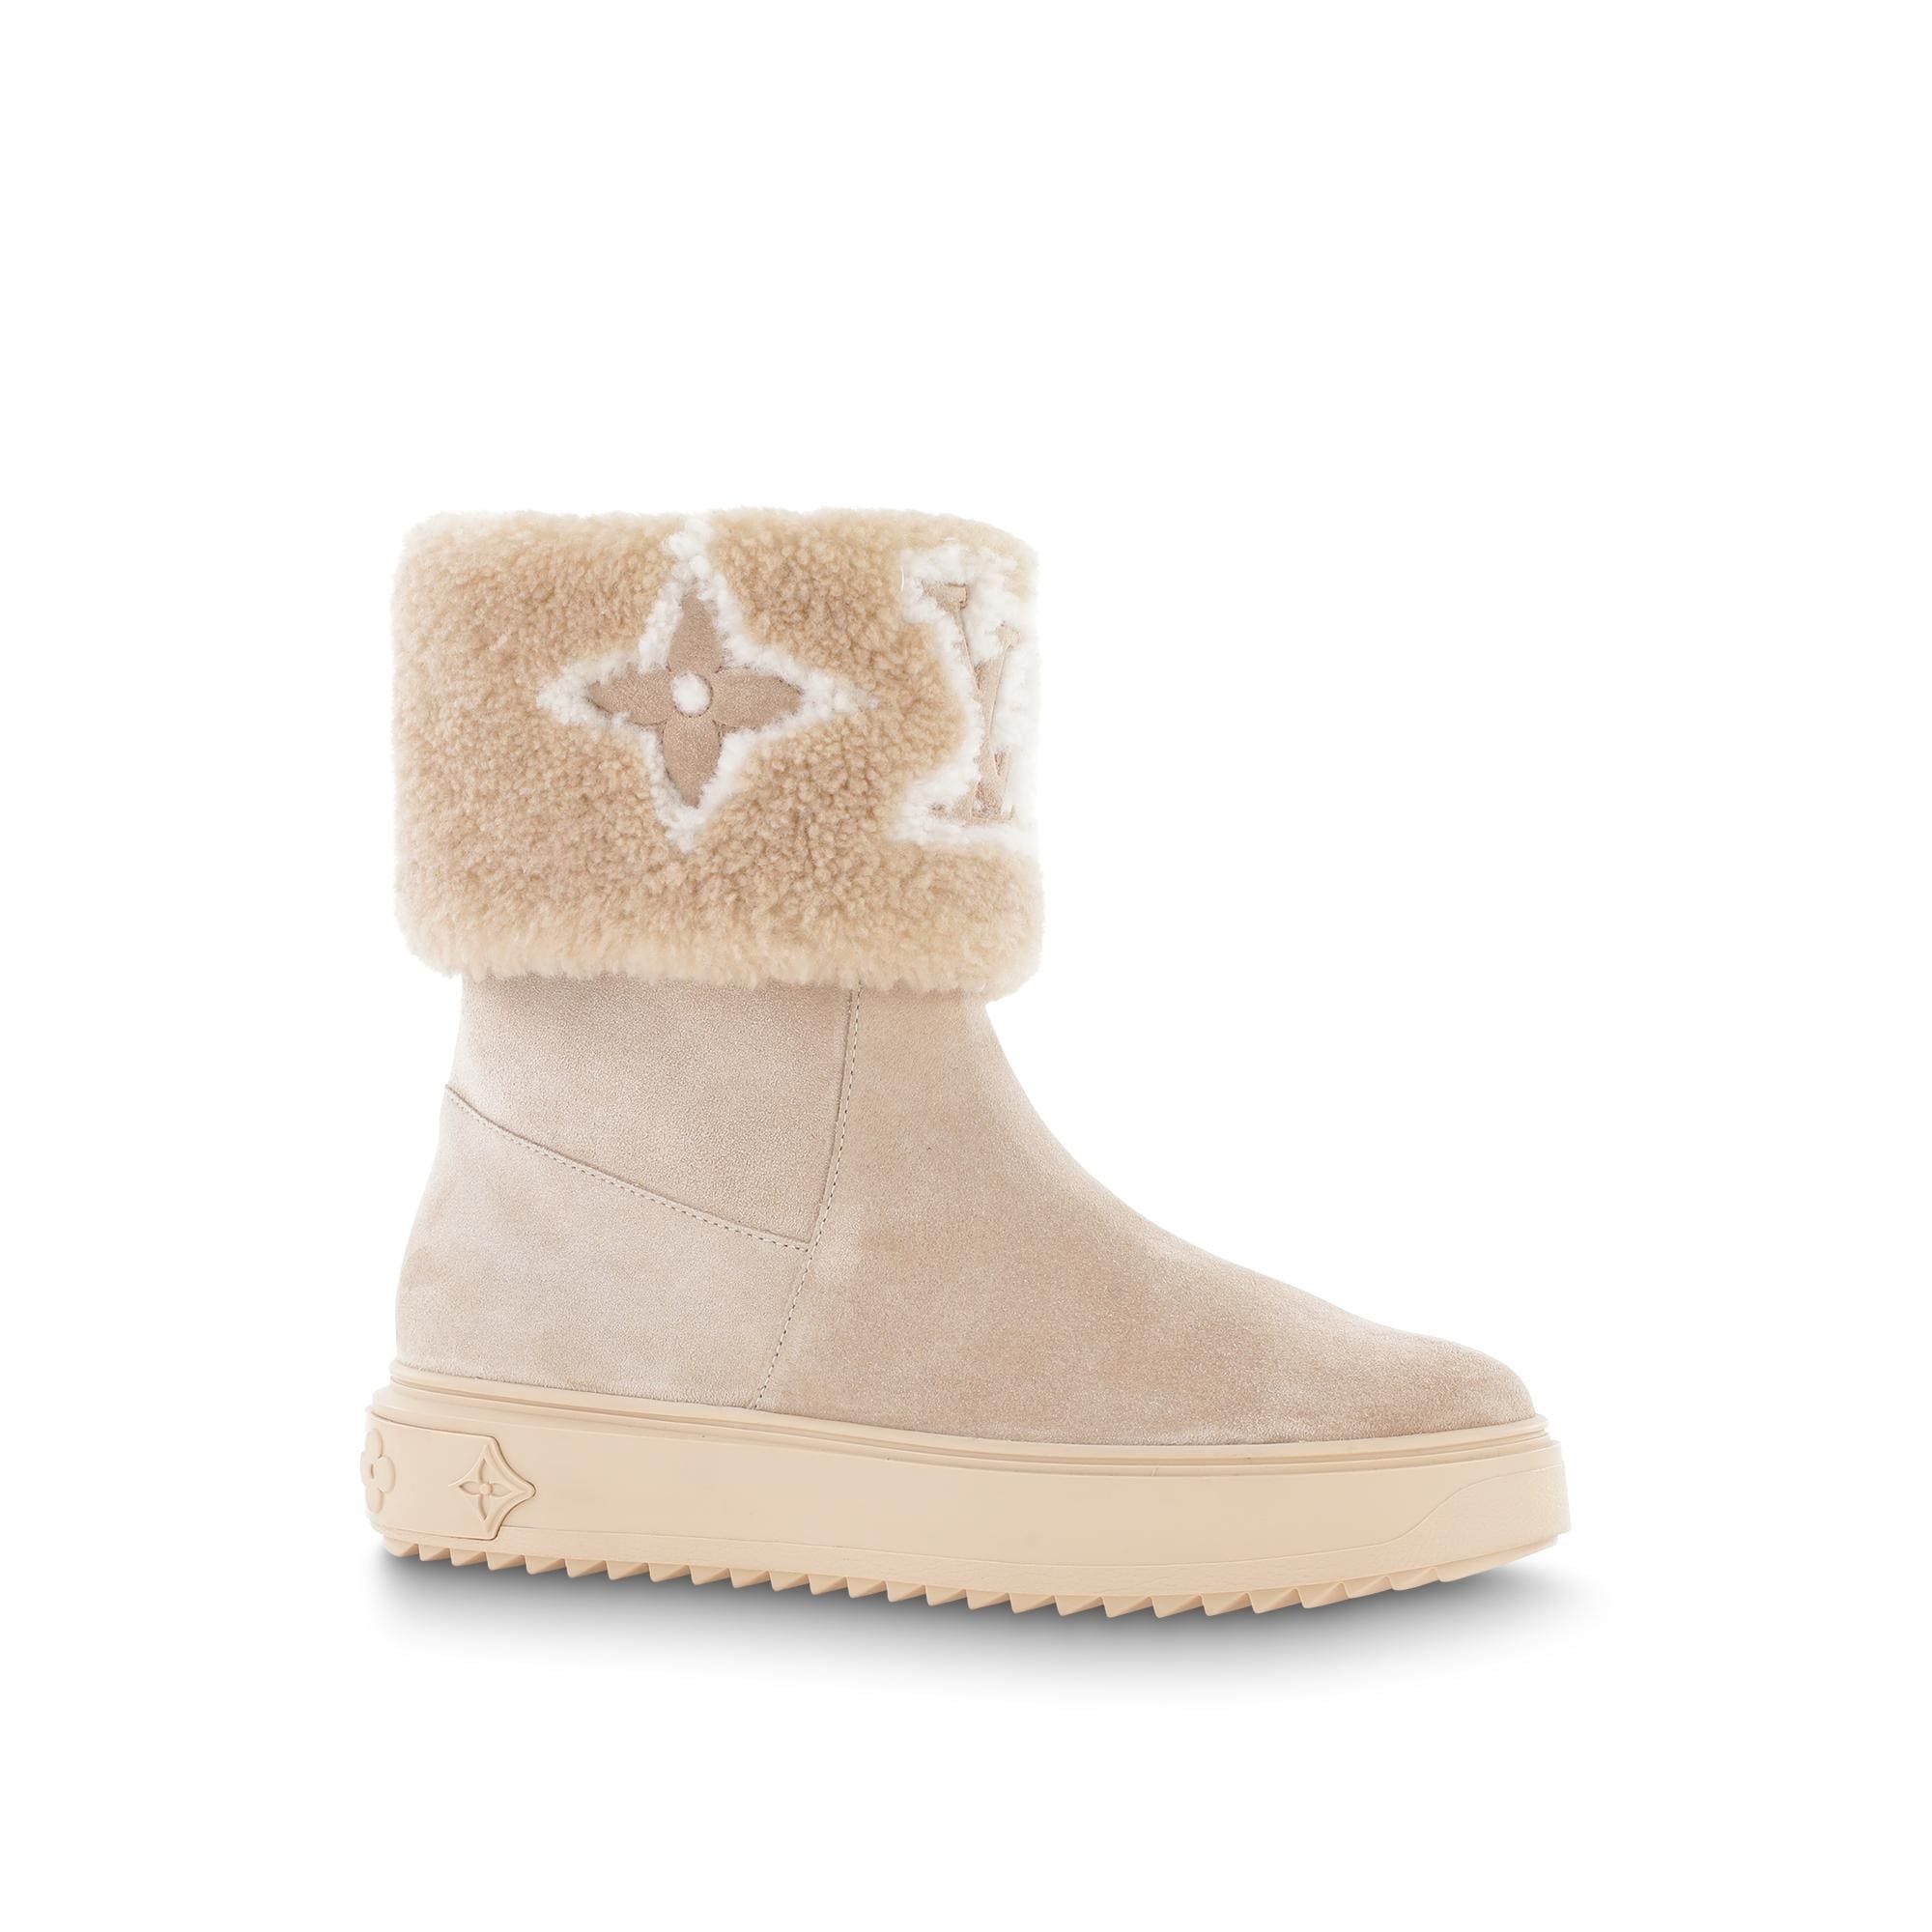 Snowdrop Flat Ankle Boot - 1